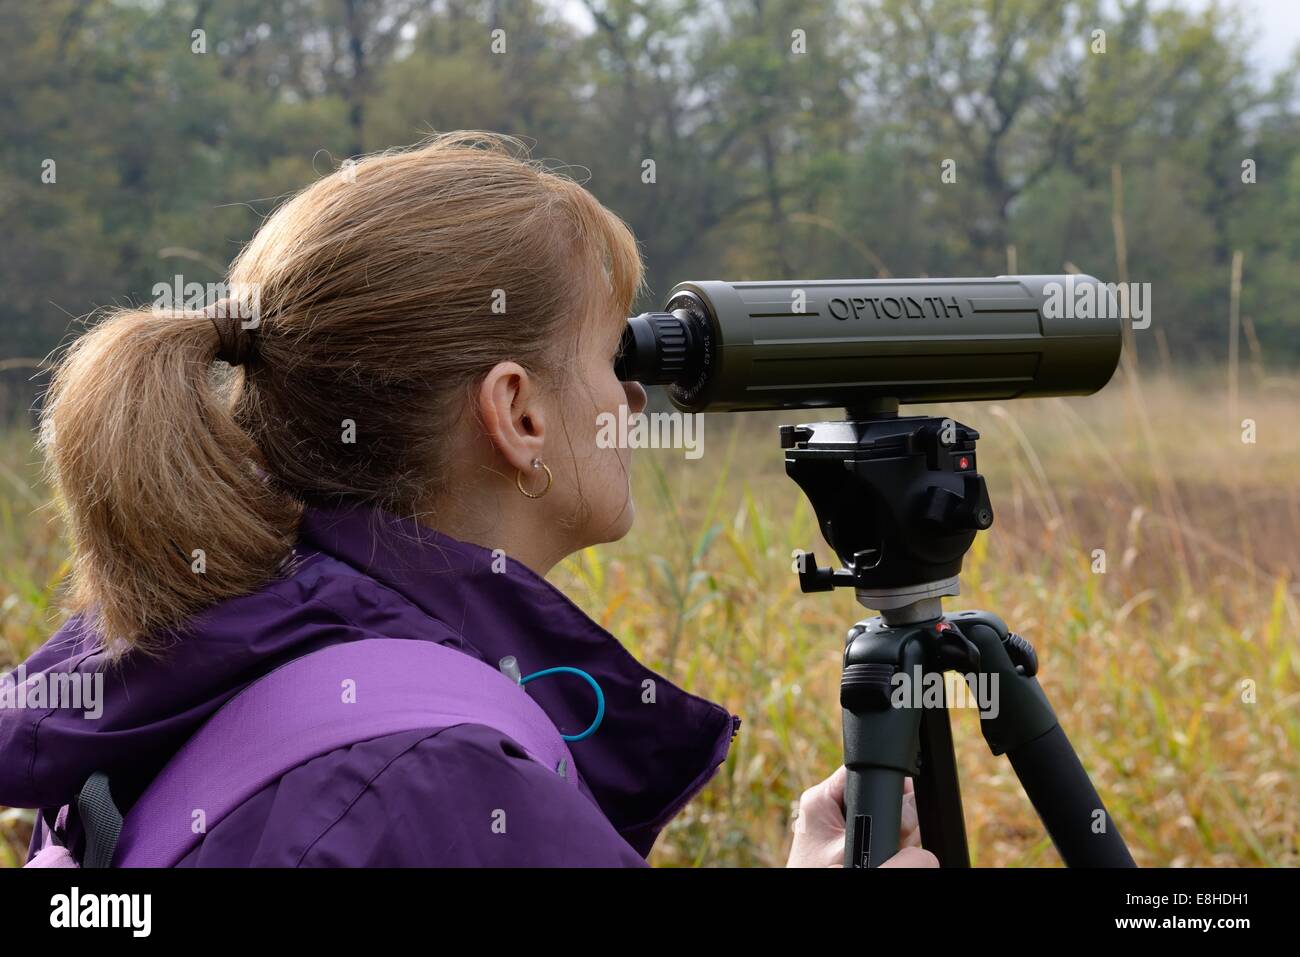 A woman uses an old spotting scope for birdwatching and wildlife. Stock Photo